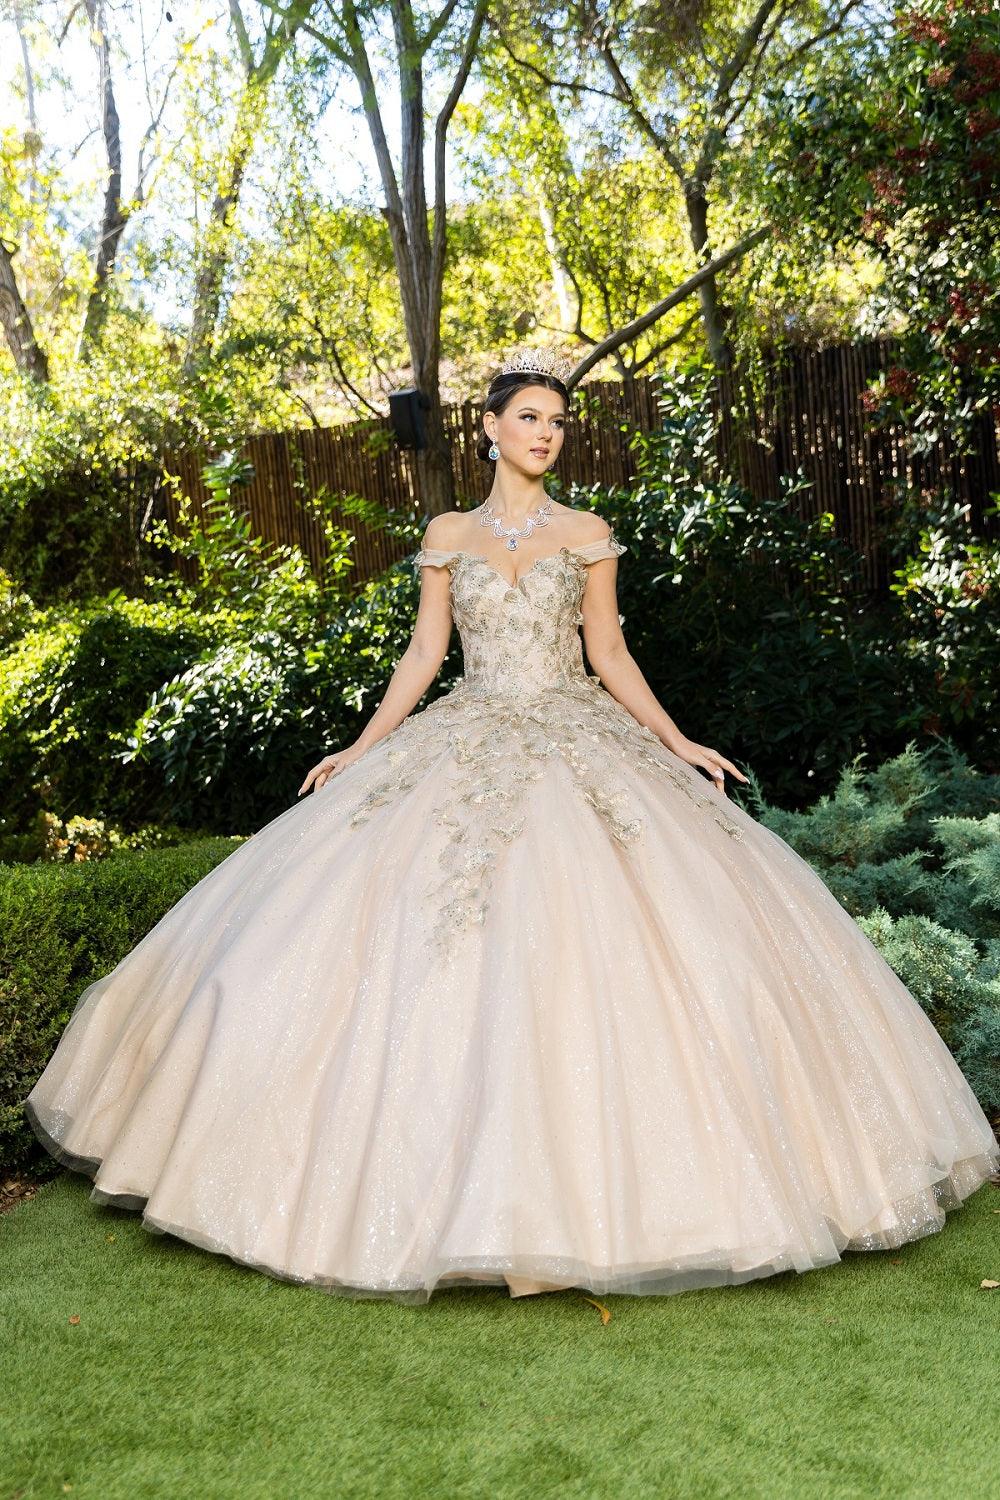 Cinderella Couture CC8046J Sleeveless Glitter Tulle Ball Gown Champagne